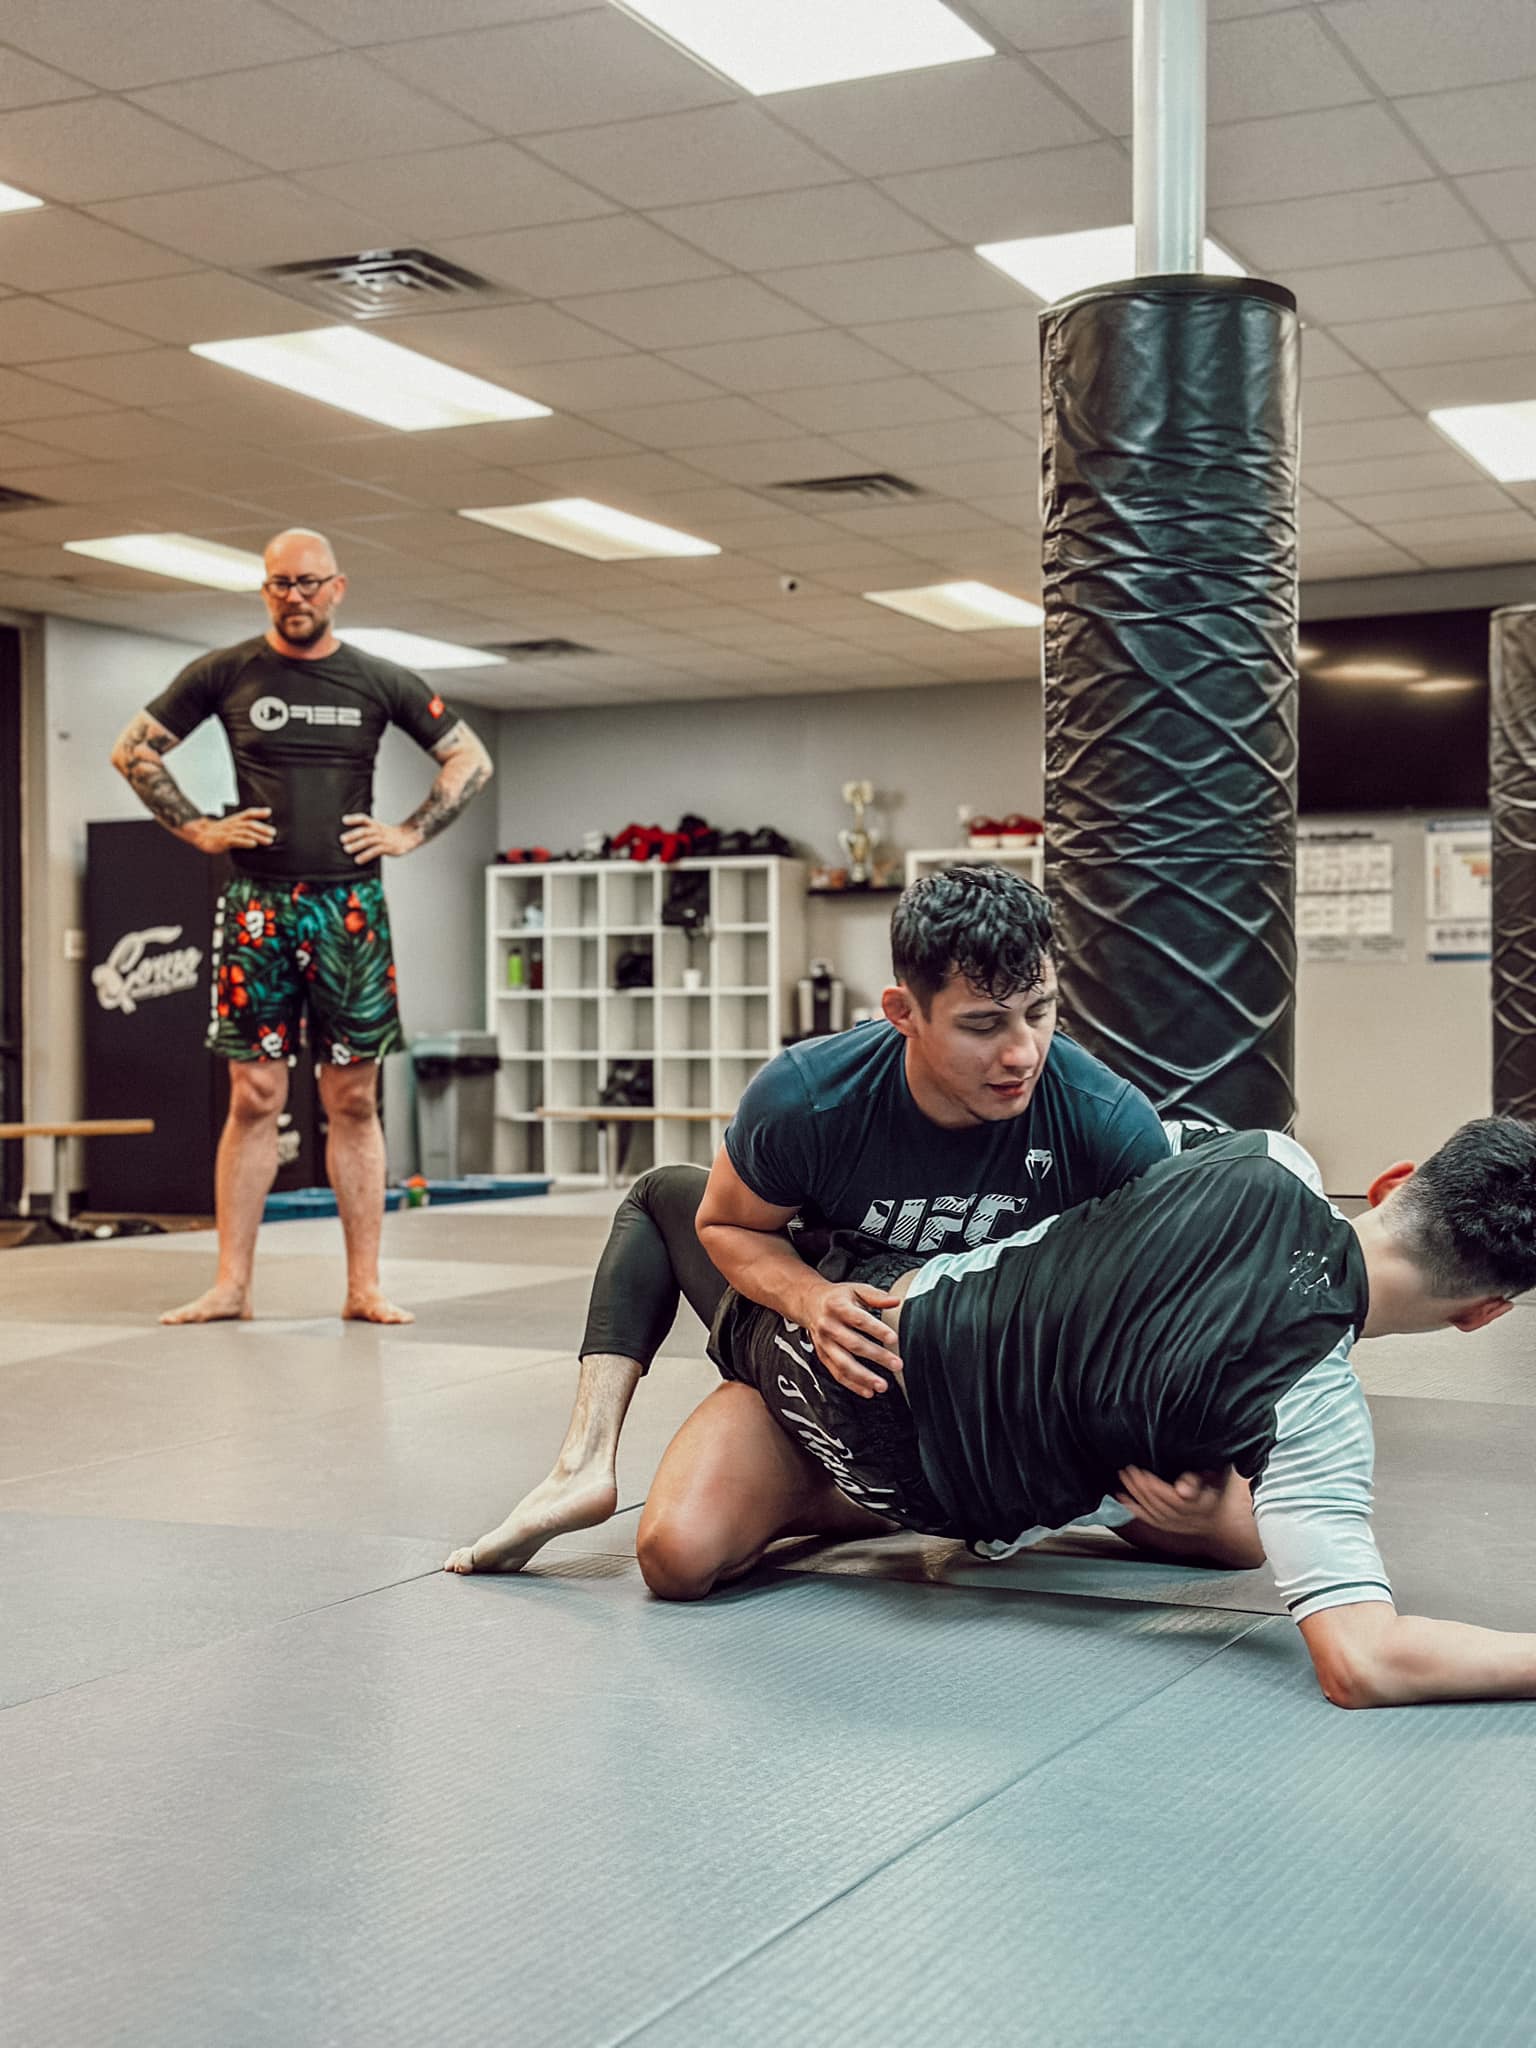 Two individuals practice Brazilian Jiu-Jitsu on the mat while a coach supervises in the background.